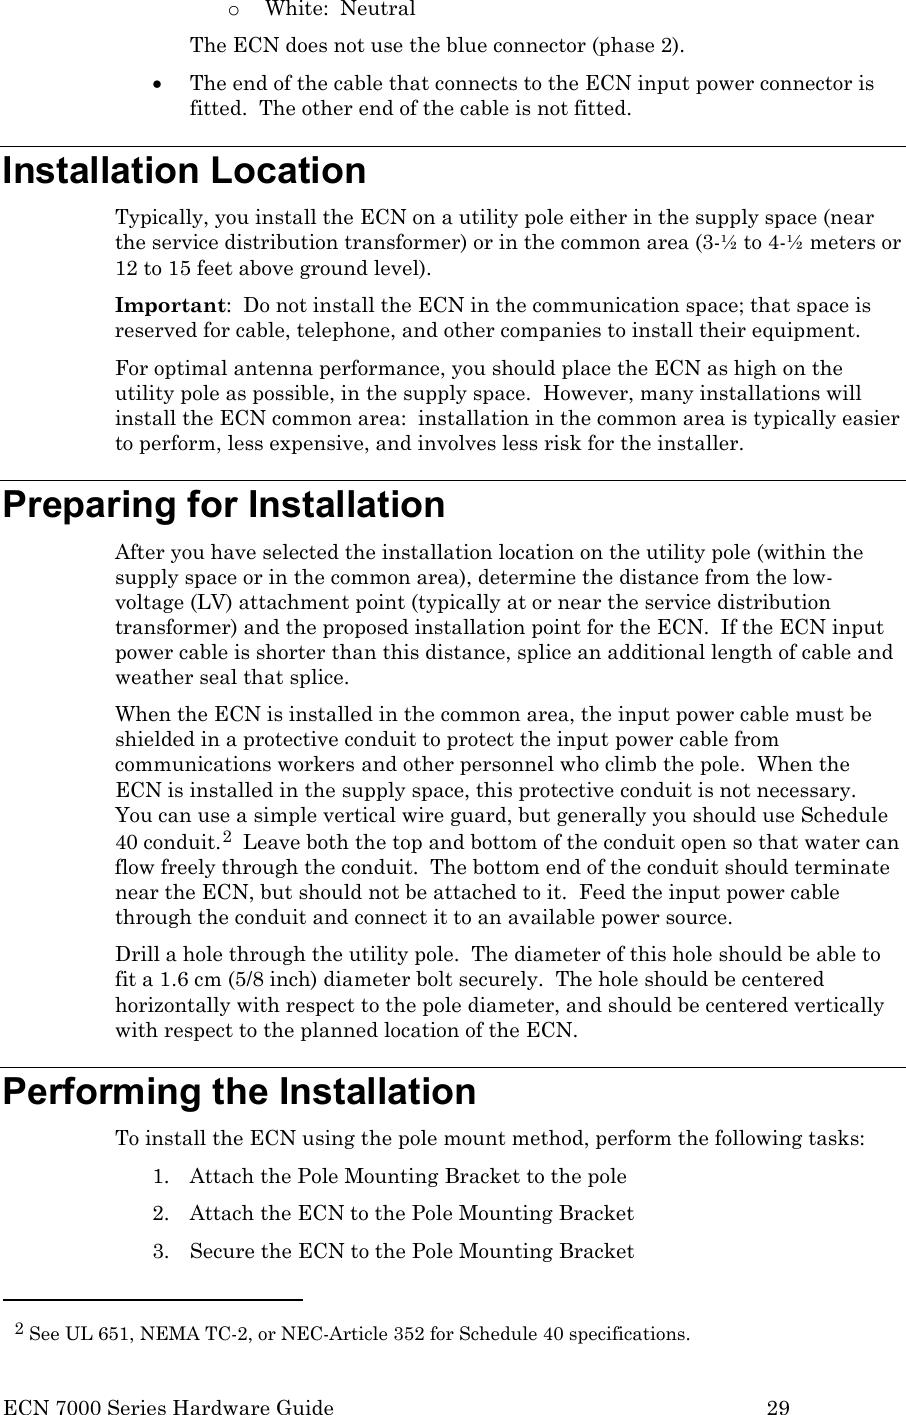  ECN 7000 Series Hardware Guide        29 o White:  Neutral The ECN does not use the blue connector (phase 2). • The end of the cable that connects to the ECN input power connector is fitted.  The other end of the cable is not fitted. Installation Location Typically, you install the ECN on a utility pole either in the supply space (near the service distribution transformer) or in the common area (3-½ to 4-½ meters or 12 to 15 feet above ground level).   Important:  Do not install the ECN in the communication space; that space is reserved for cable, telephone, and other companies to install their equipment.   For optimal antenna performance, you should place the ECN as high on the utility pole as possible, in the supply space.  However, many installations will install the ECN common area:  installation in the common area is typically easier to perform, less expensive, and involves less risk for the installer.  Preparing for Installation After you have selected the installation location on the utility pole (within the supply space or in the common area), determine the distance from the low-voltage (LV) attachment point (typically at or near the service distribution transformer) and the proposed installation point for the ECN.  If the ECN input power cable is shorter than this distance, splice an additional length of cable and weather seal that splice. When the ECN is installed in the common area, the input power cable must be shielded in a protective conduit to protect the input power cable from communications workers and other personnel who climb the pole.  When the ECN is installed in the supply space, this protective conduit is not necessary.  You can use a simple vertical wire guard, but generally you should use Schedule 40 conduit.2  Leave both the top and bottom of the conduit open so that water can flow freely through the conduit.  The bottom end of the conduit should terminate near the ECN, but should not be attached to it.  Feed the input power cable through the conduit and connect it to an available power source.   Drill a hole through the utility pole.  The diameter of this hole should be able to fit a 1.6 cm (5/8 inch) diameter bolt securely.  The hole should be centered horizontally with respect to the pole diameter, and should be centered vertically with respect to the planned location of the ECN. Performing the Installation To install the ECN using the pole mount method, perform the following tasks: 1. Attach the Pole Mounting Bracket to the pole 2. Attach the ECN to the Pole Mounting Bracket 3. Secure the ECN to the Pole Mounting Bracket                                                  2 See UL 651, NEMA TC-2, or NEC-Article 352 for Schedule 40 specifications. 